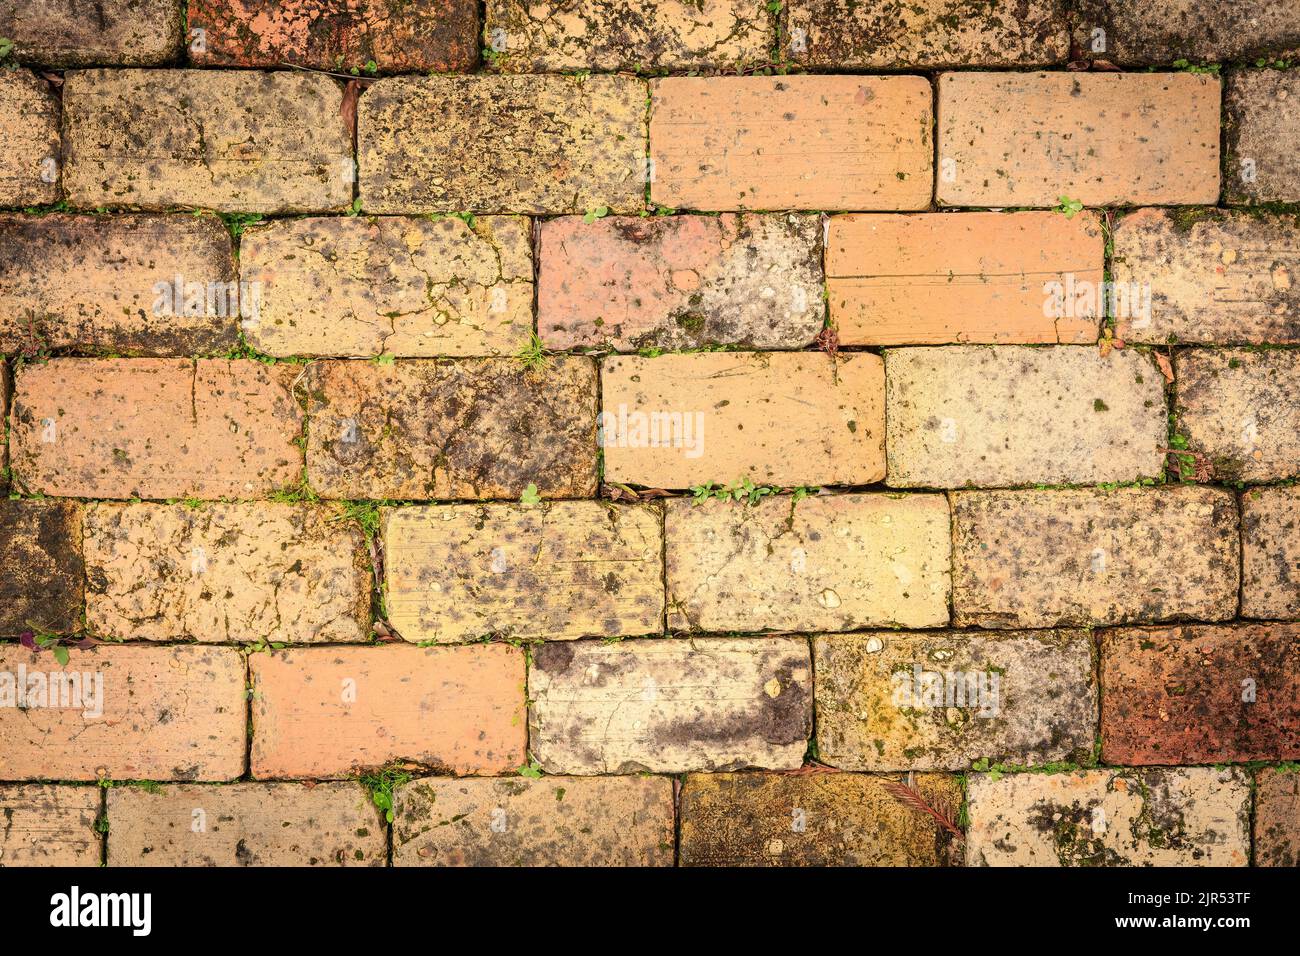 Closeup view of old, weathered brick paving, with plants growing in the cracks Stock Photo